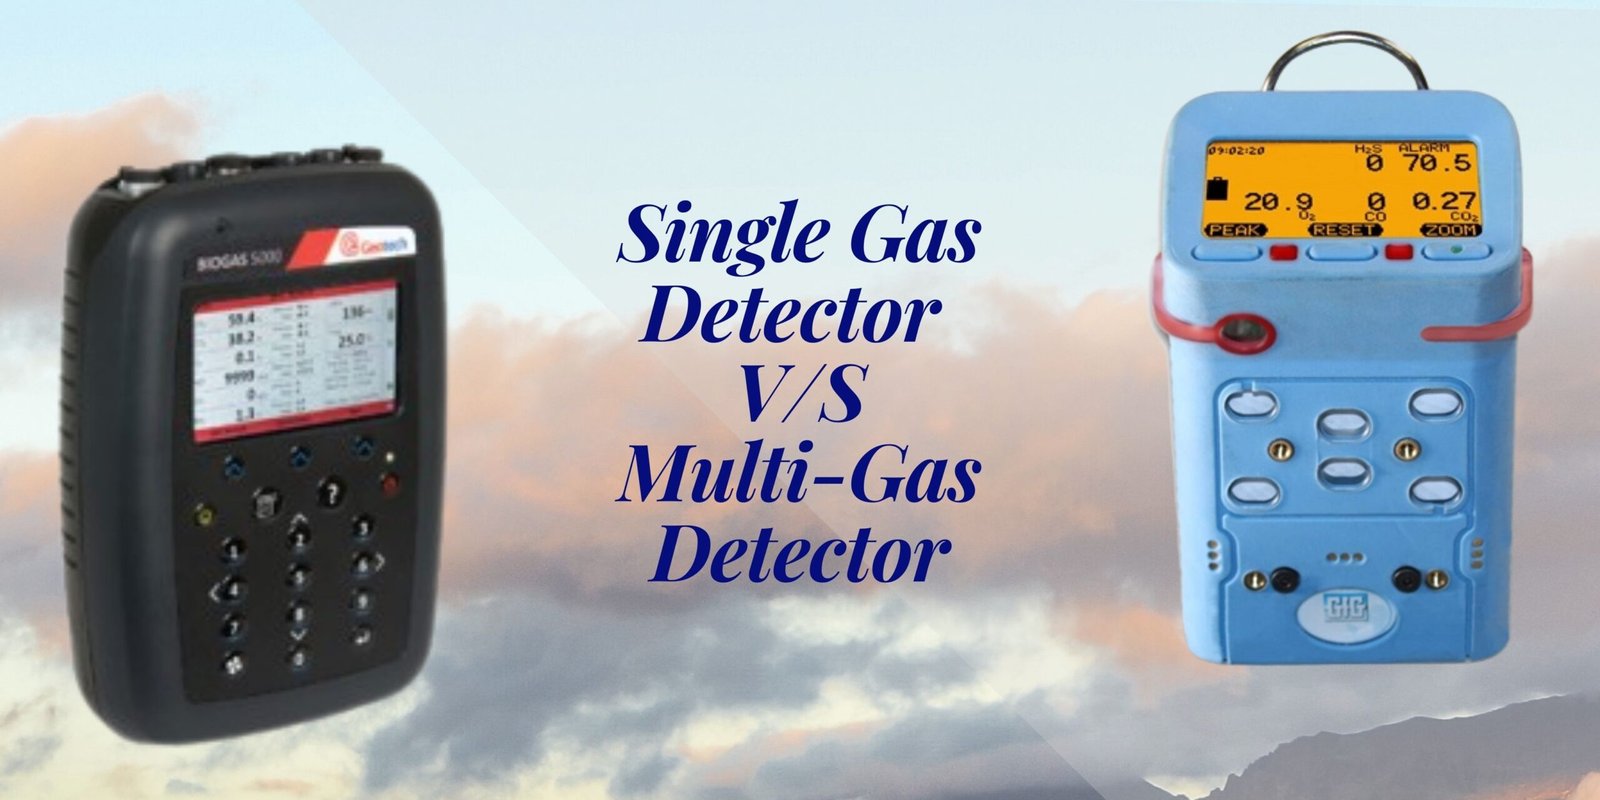 The Difference Between Single Gas and Multi-Gas Detectors